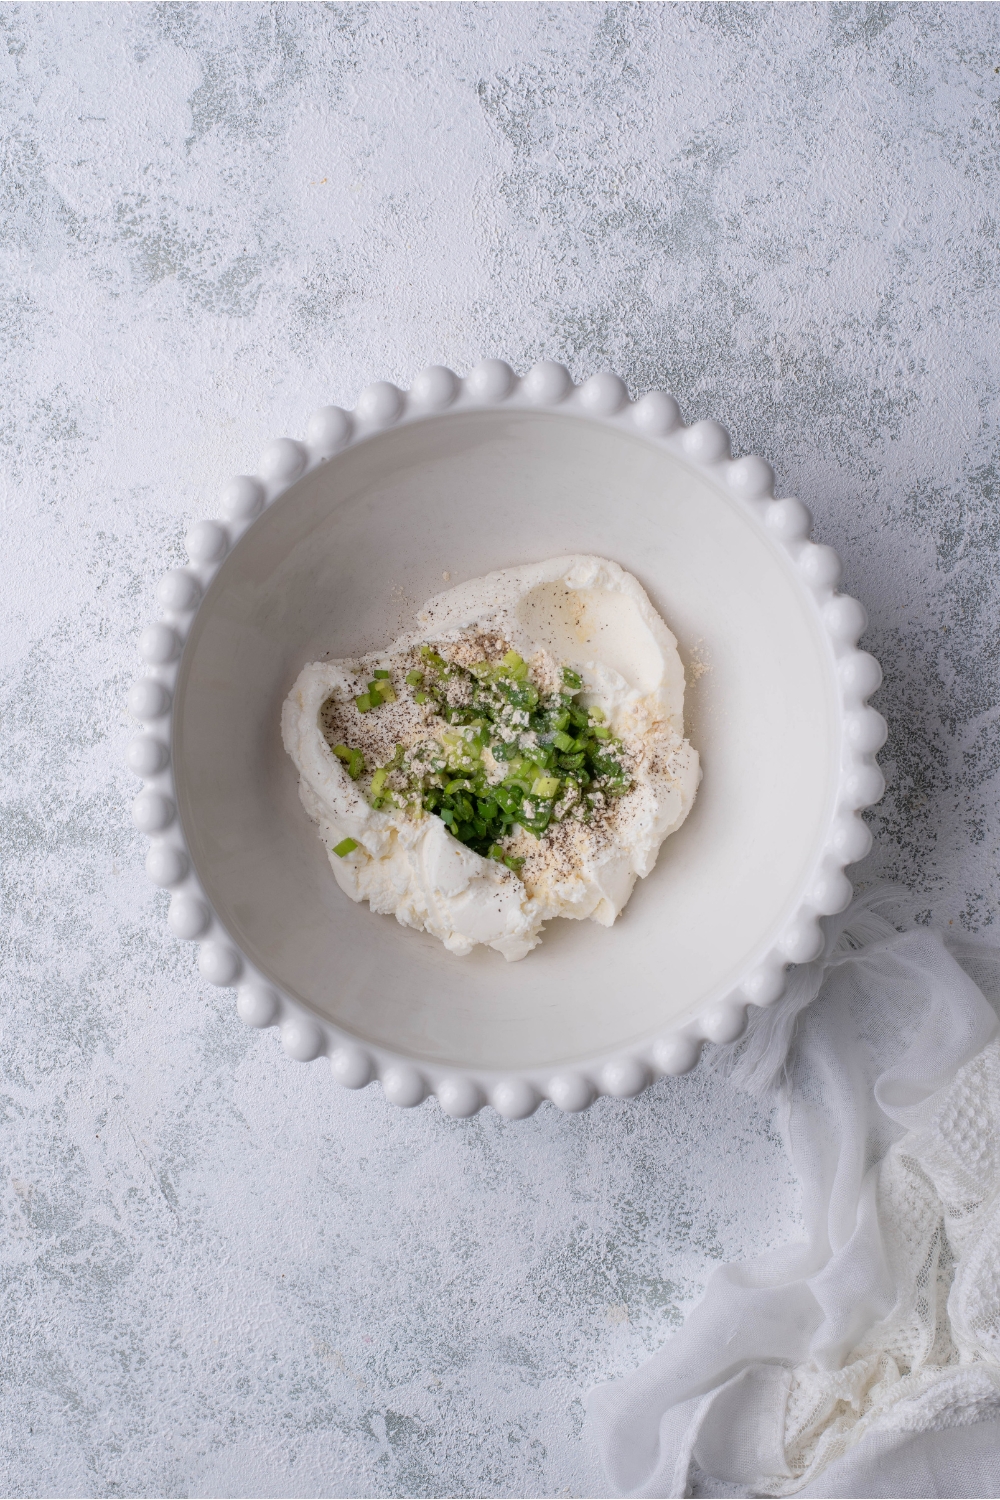 A decorative white bowl filled with cream cheese, green onion, and spices.